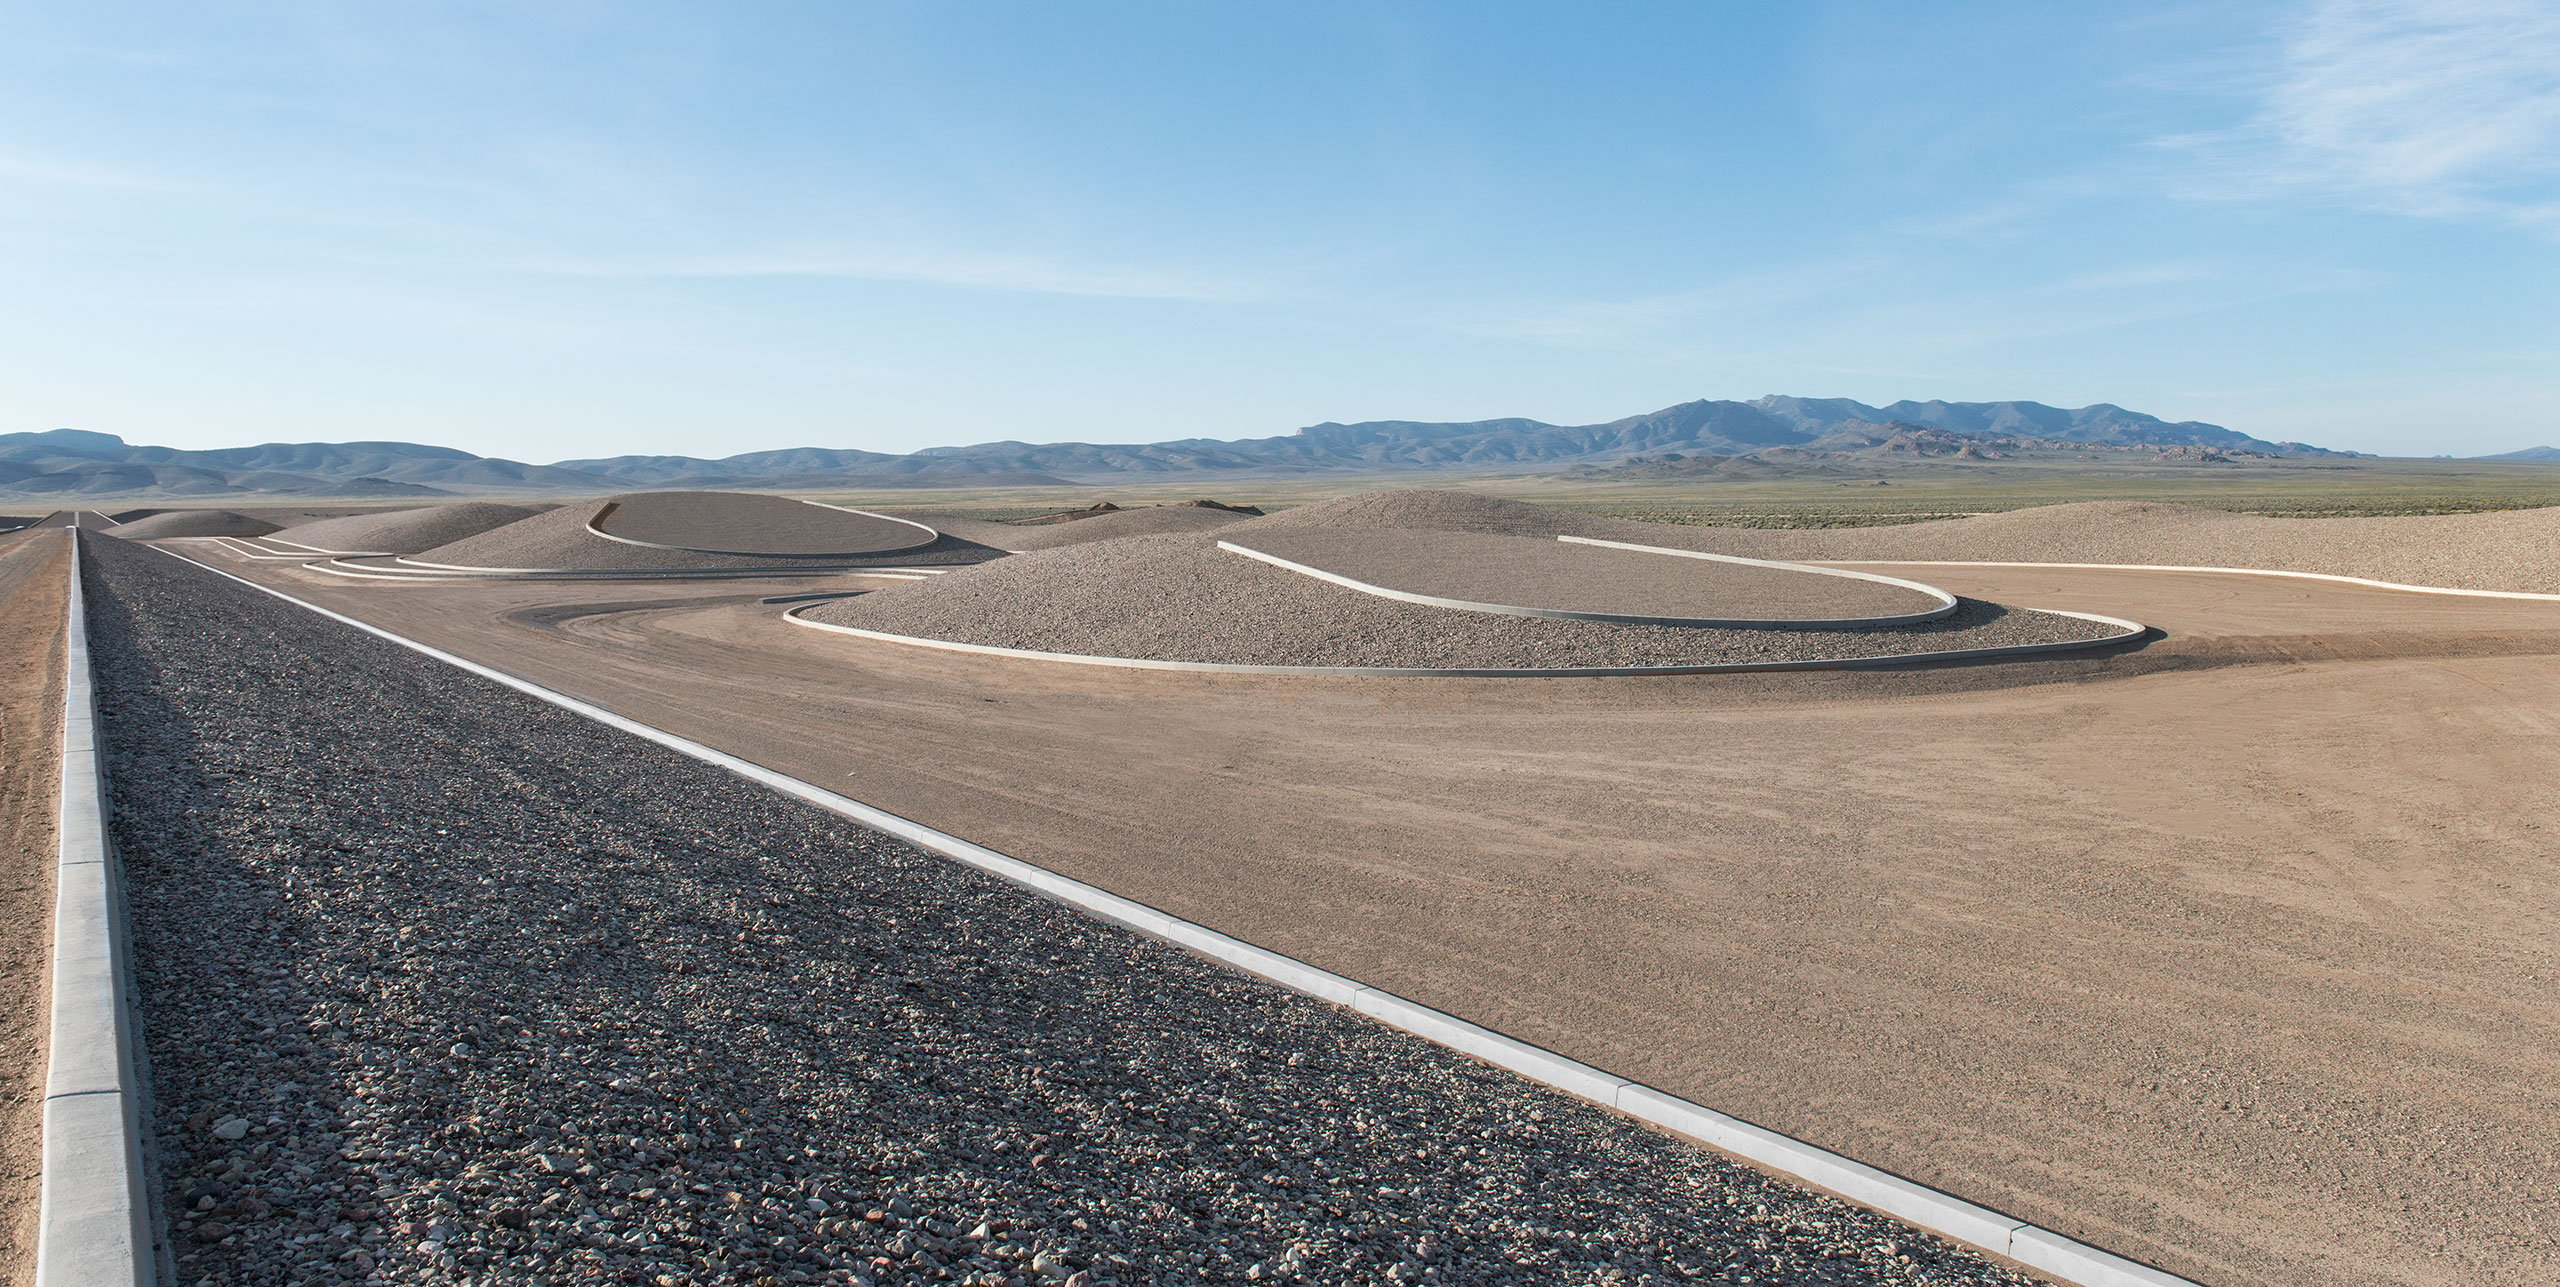 City, 1970 – 2022 © Michael Heizer. Courtesy of Triple Aught Foundation. Photo: Ben Blackwell